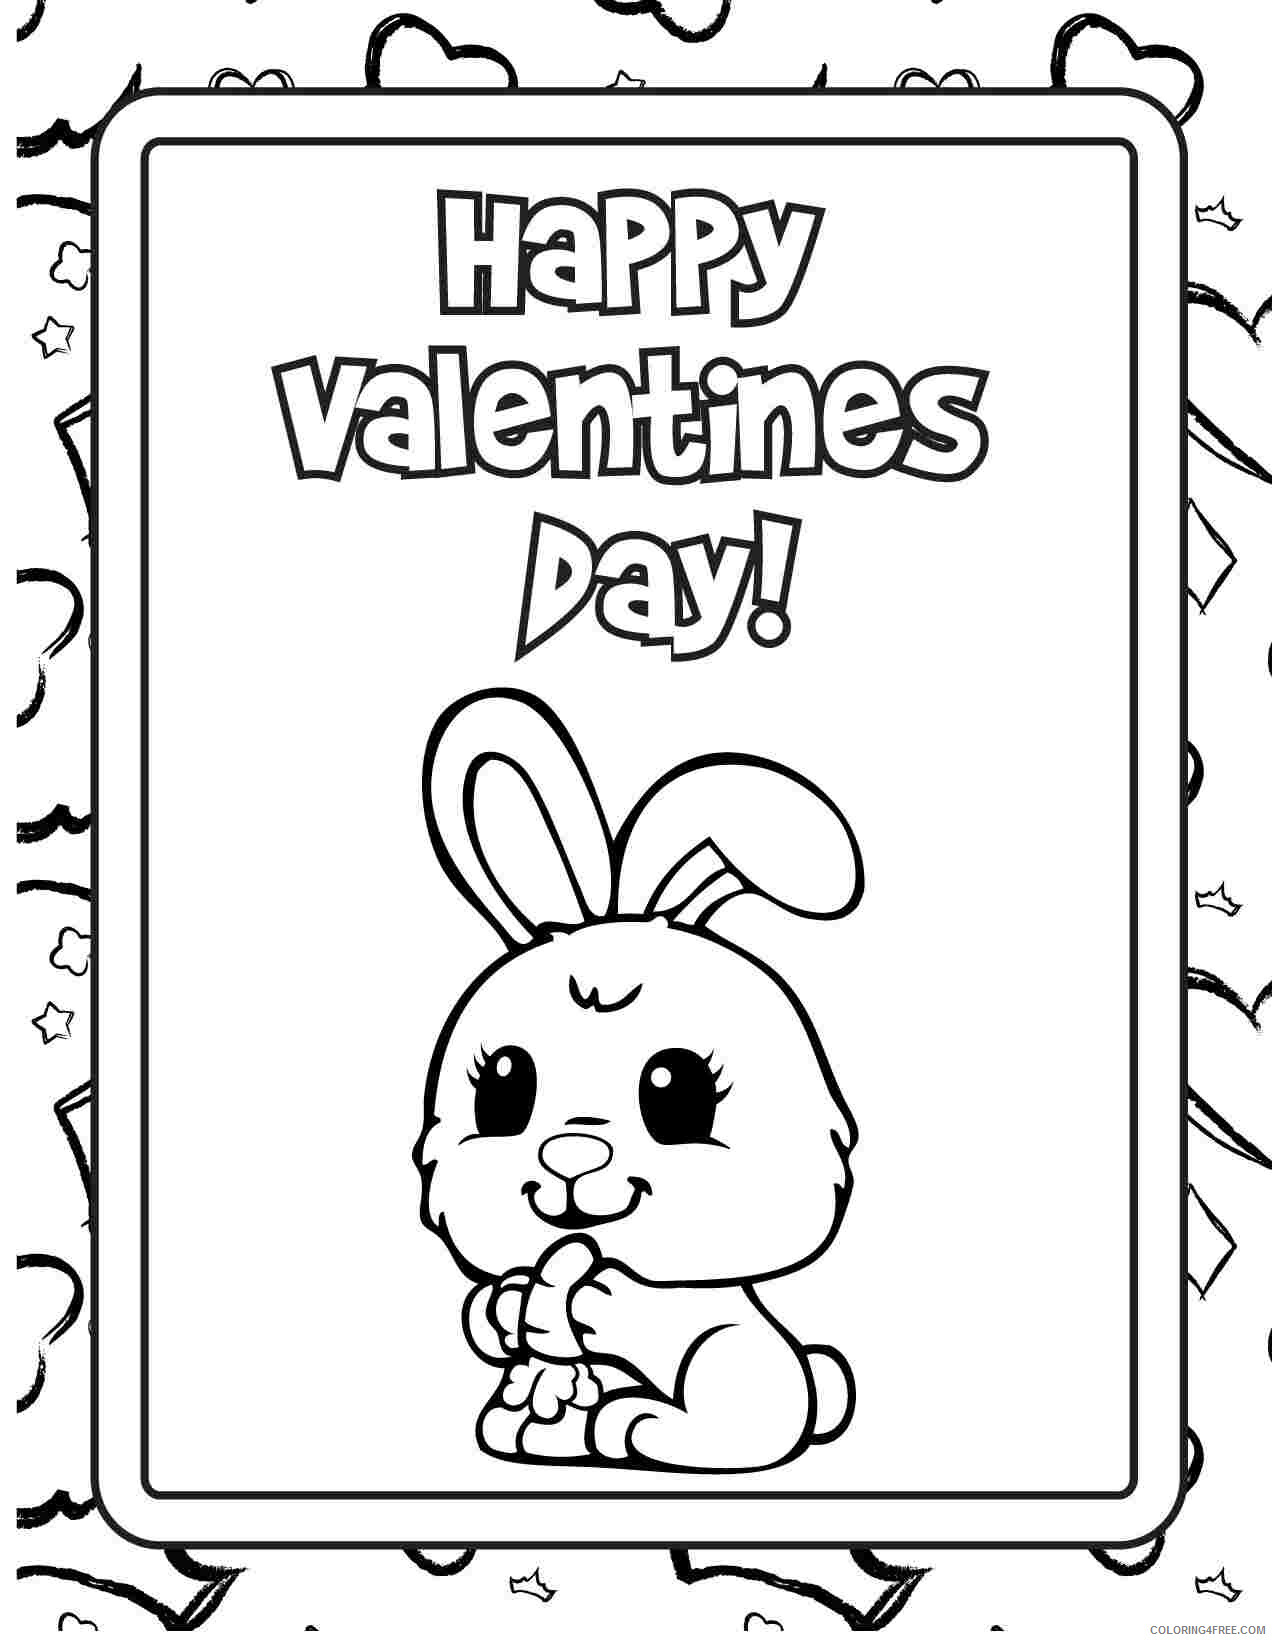 Valentines Day Coloring Pages Holiday Happy Valentines Day Bunny Printable 2021 0968 Coloring4free